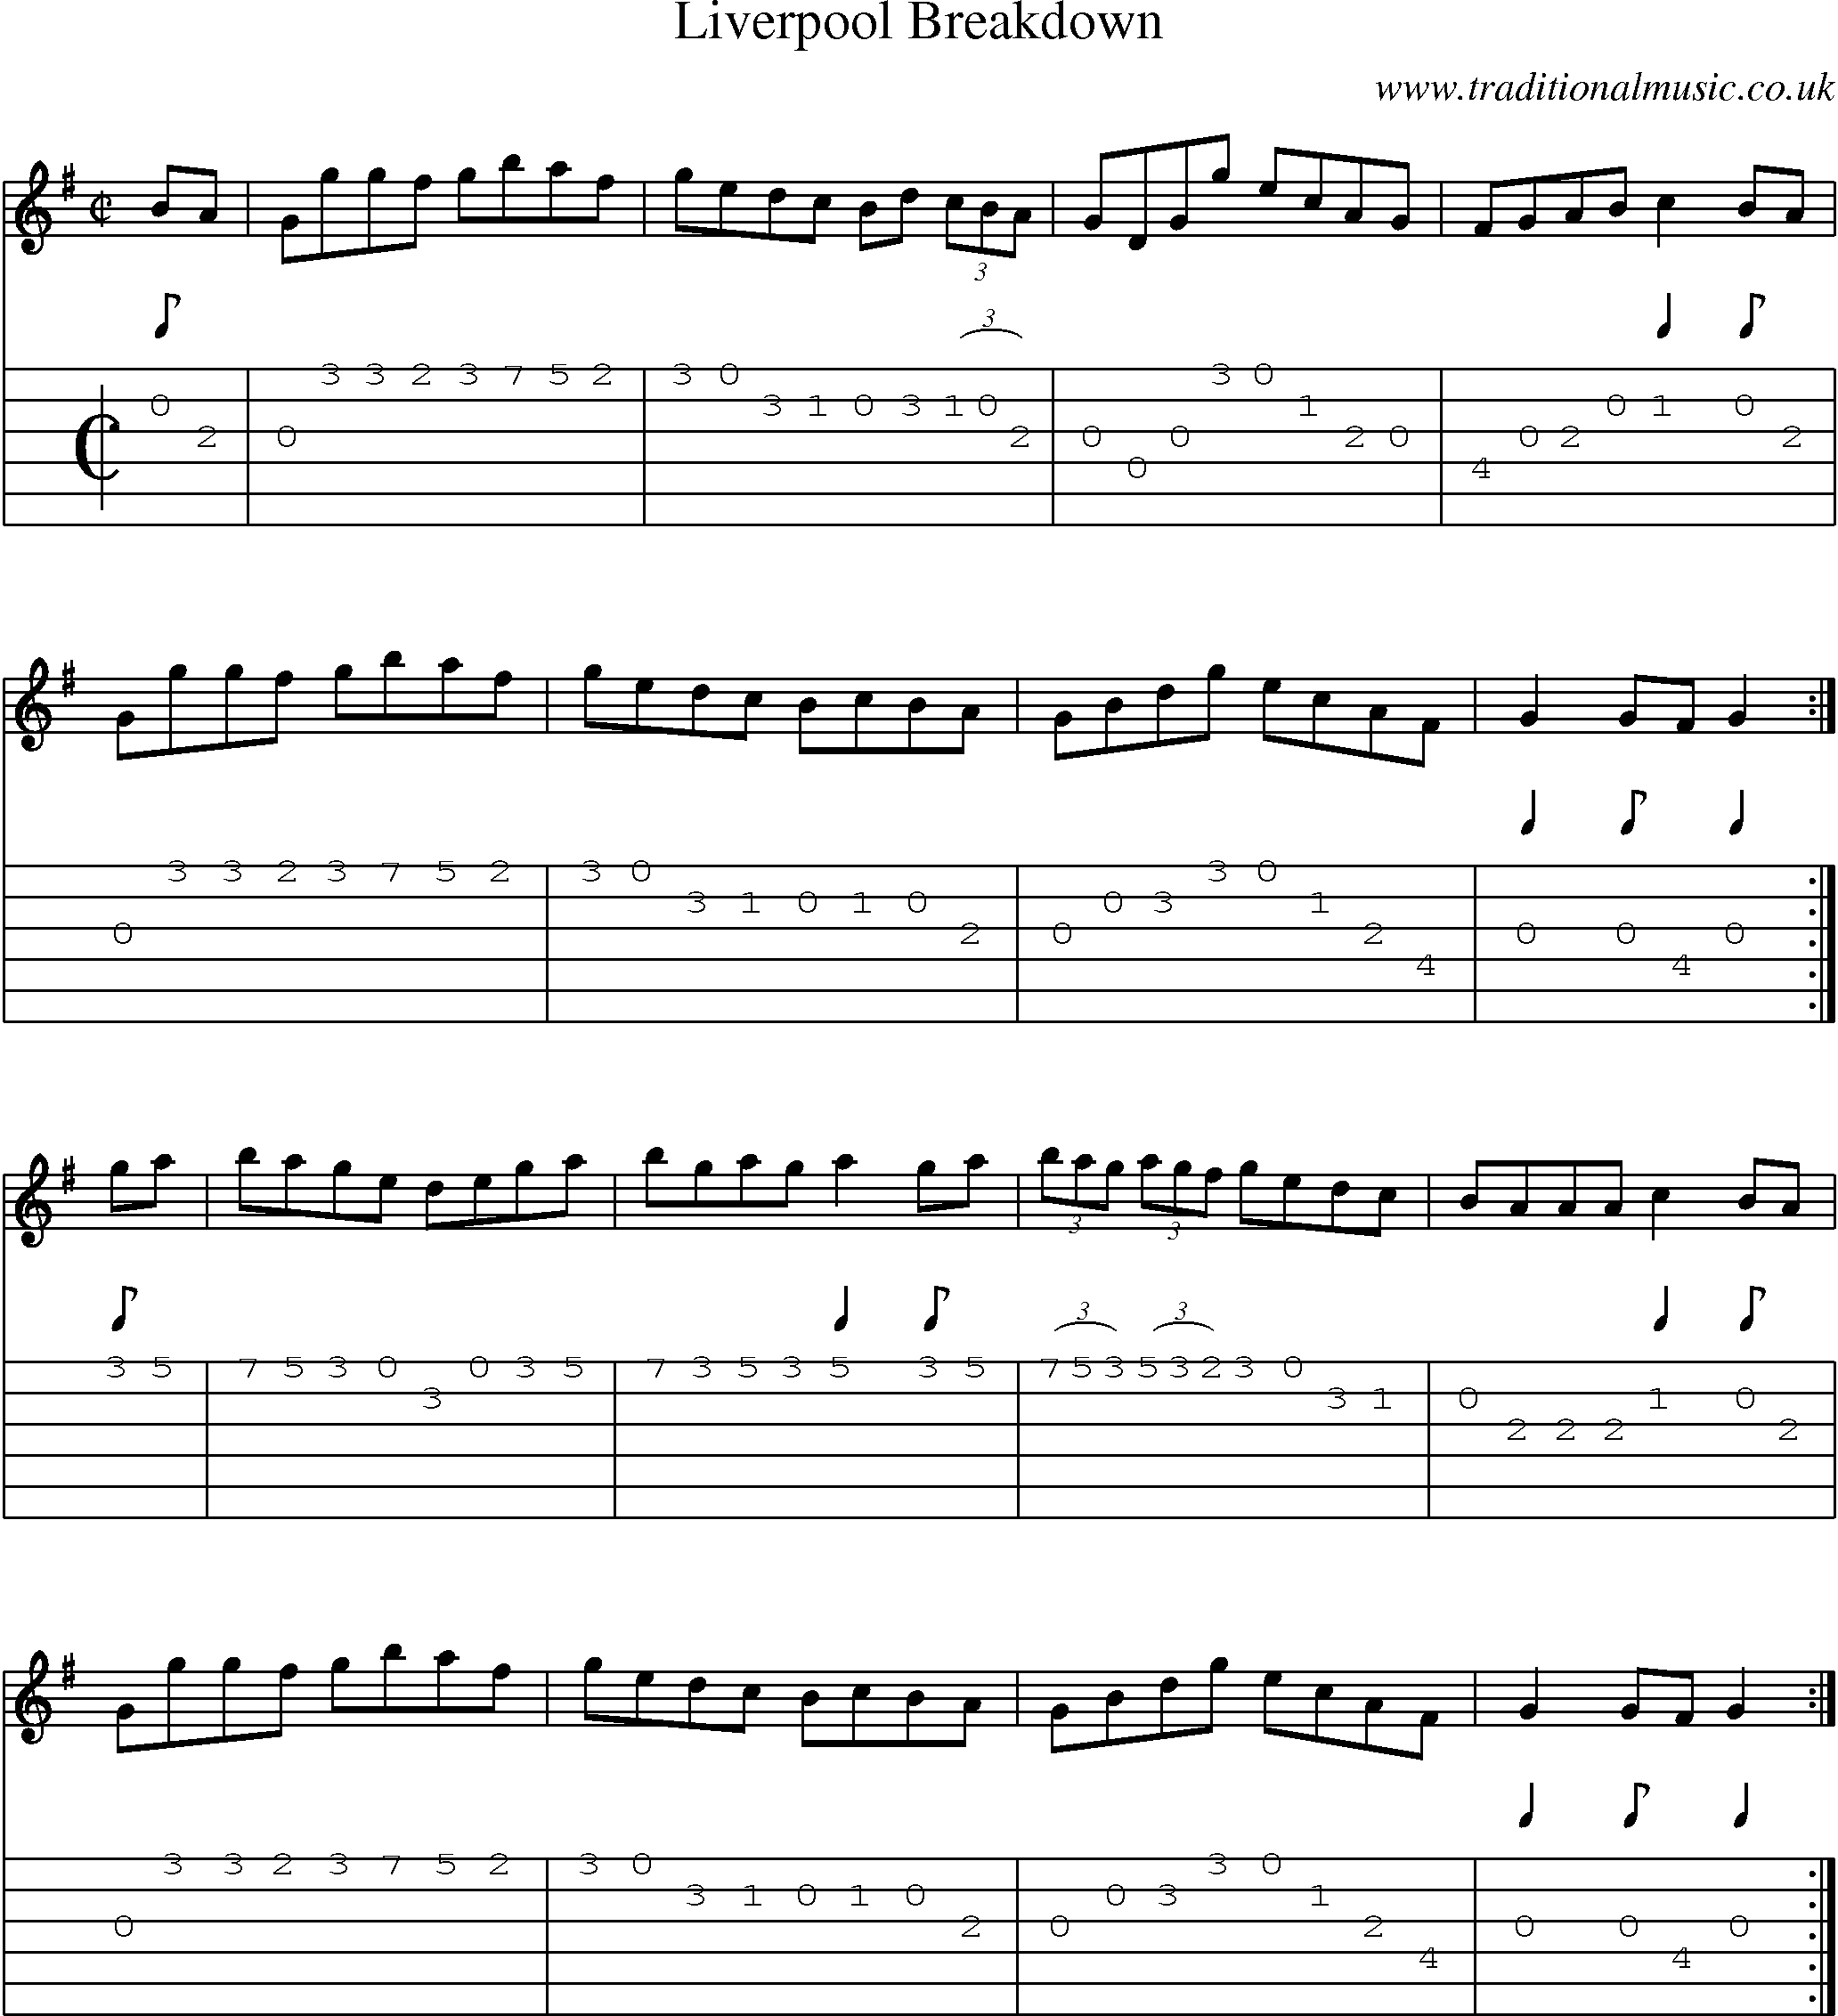 Music Score and Guitar Tabs for Liverpool Breakdown